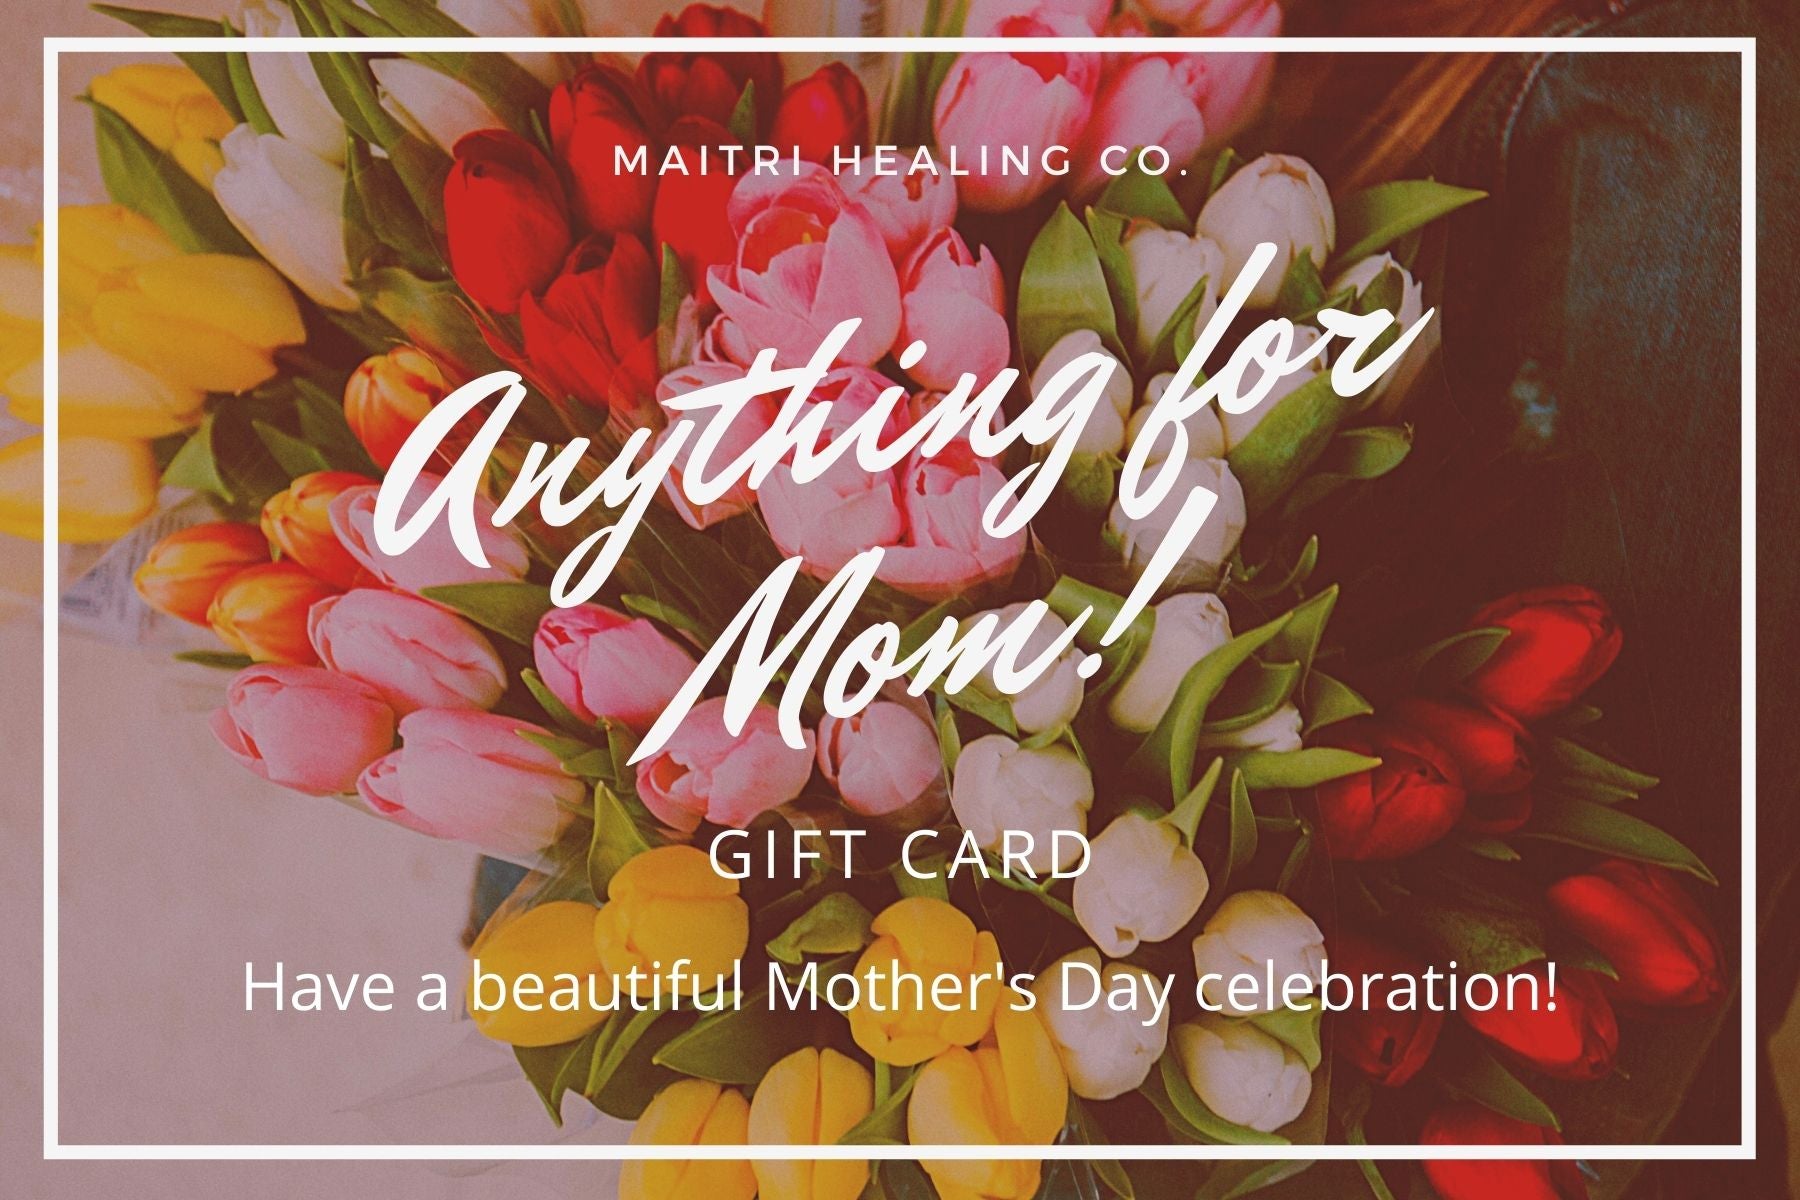 Mother's Day Gift Card - Maitri Healing Co.